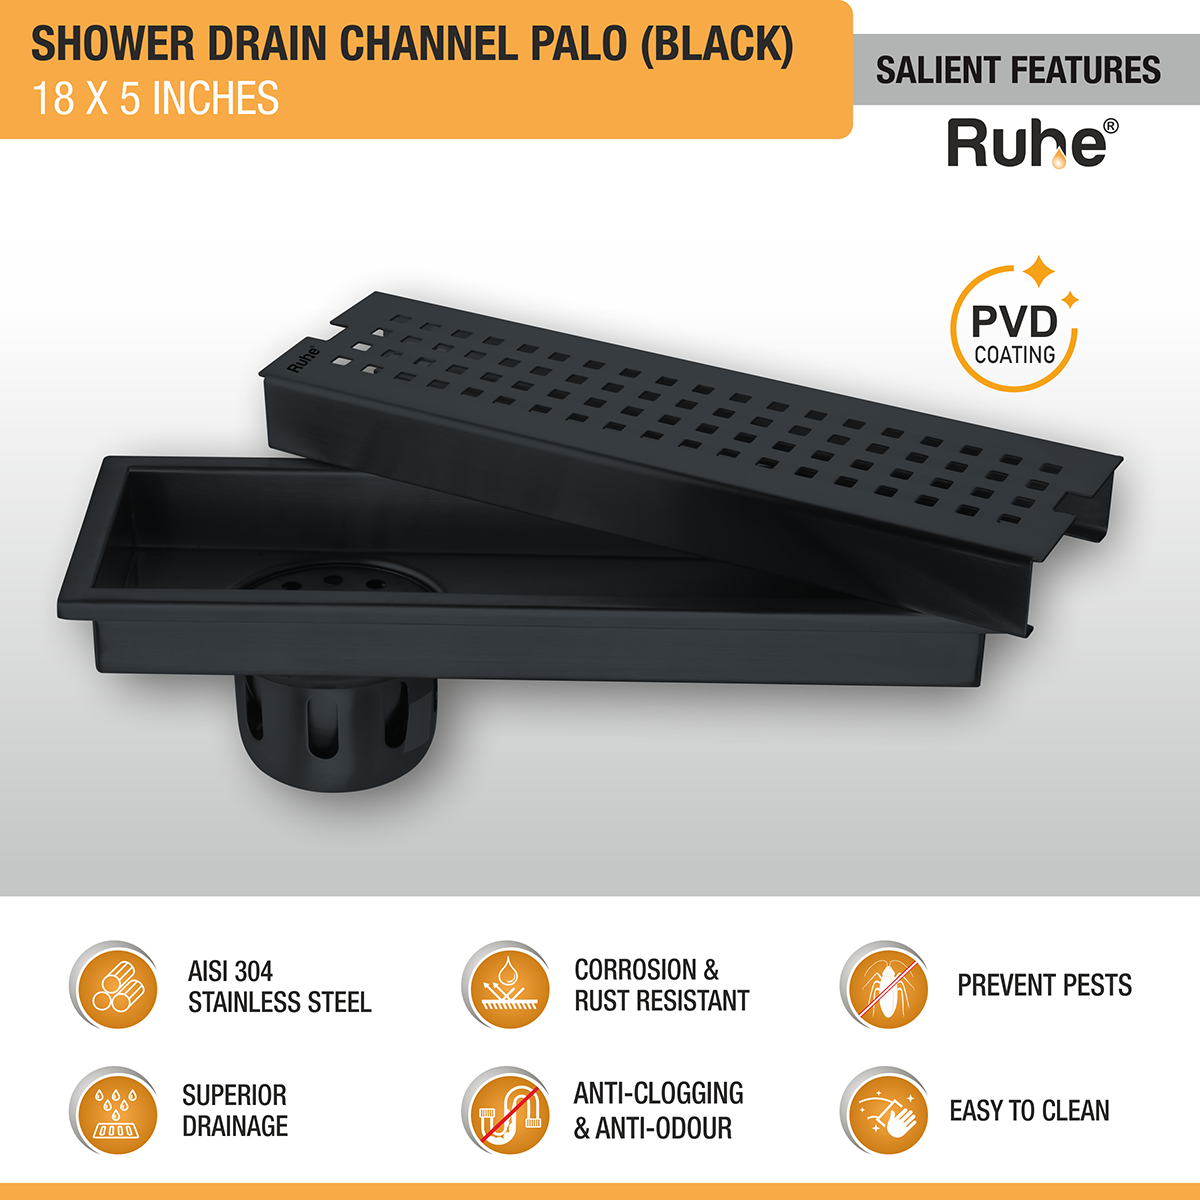 Palo Shower Drain Channel (18 x 5 Inches) Black PVD Coated features and benefits